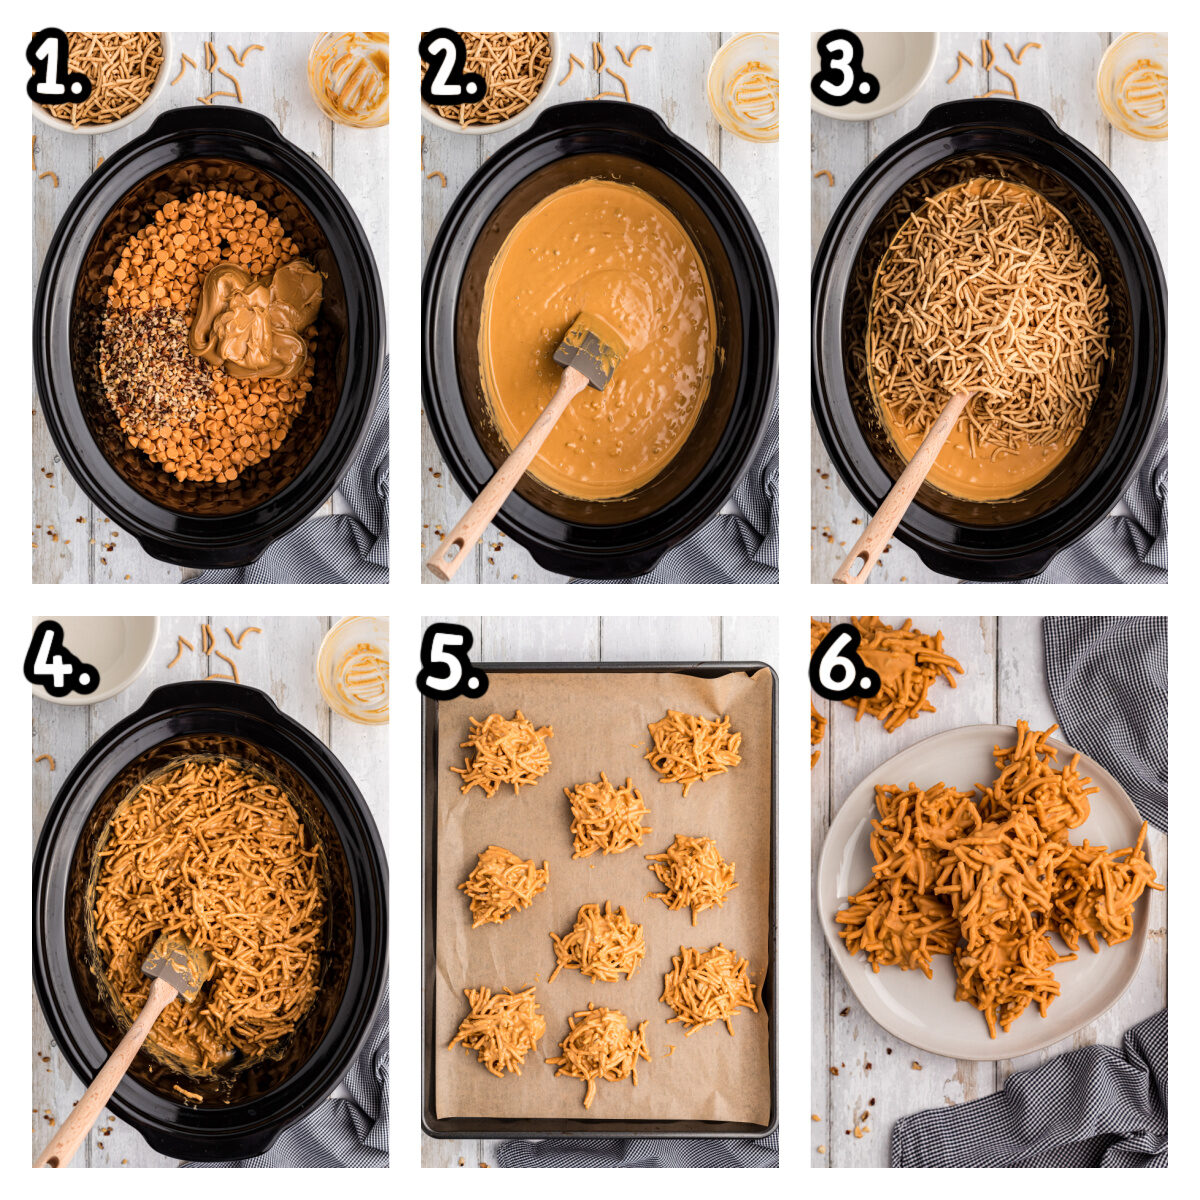 6 images showing how to make butterscotch haystacks in a slow cooker.